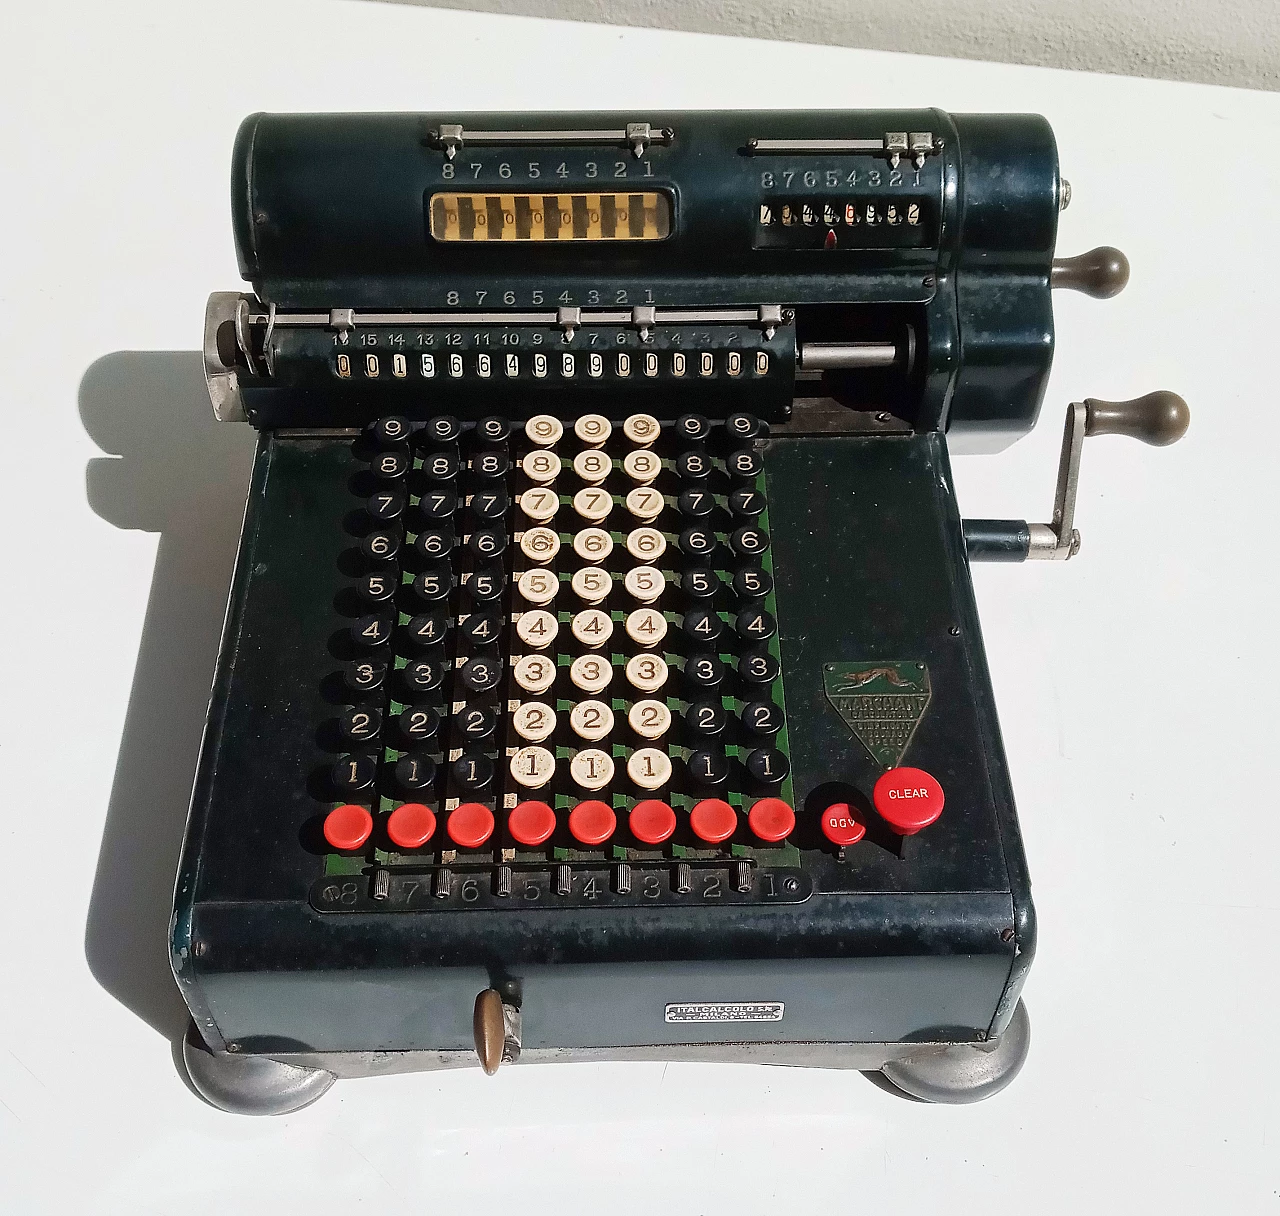 HS8-36961 adding machine calculator by Marchant, 1920s 1